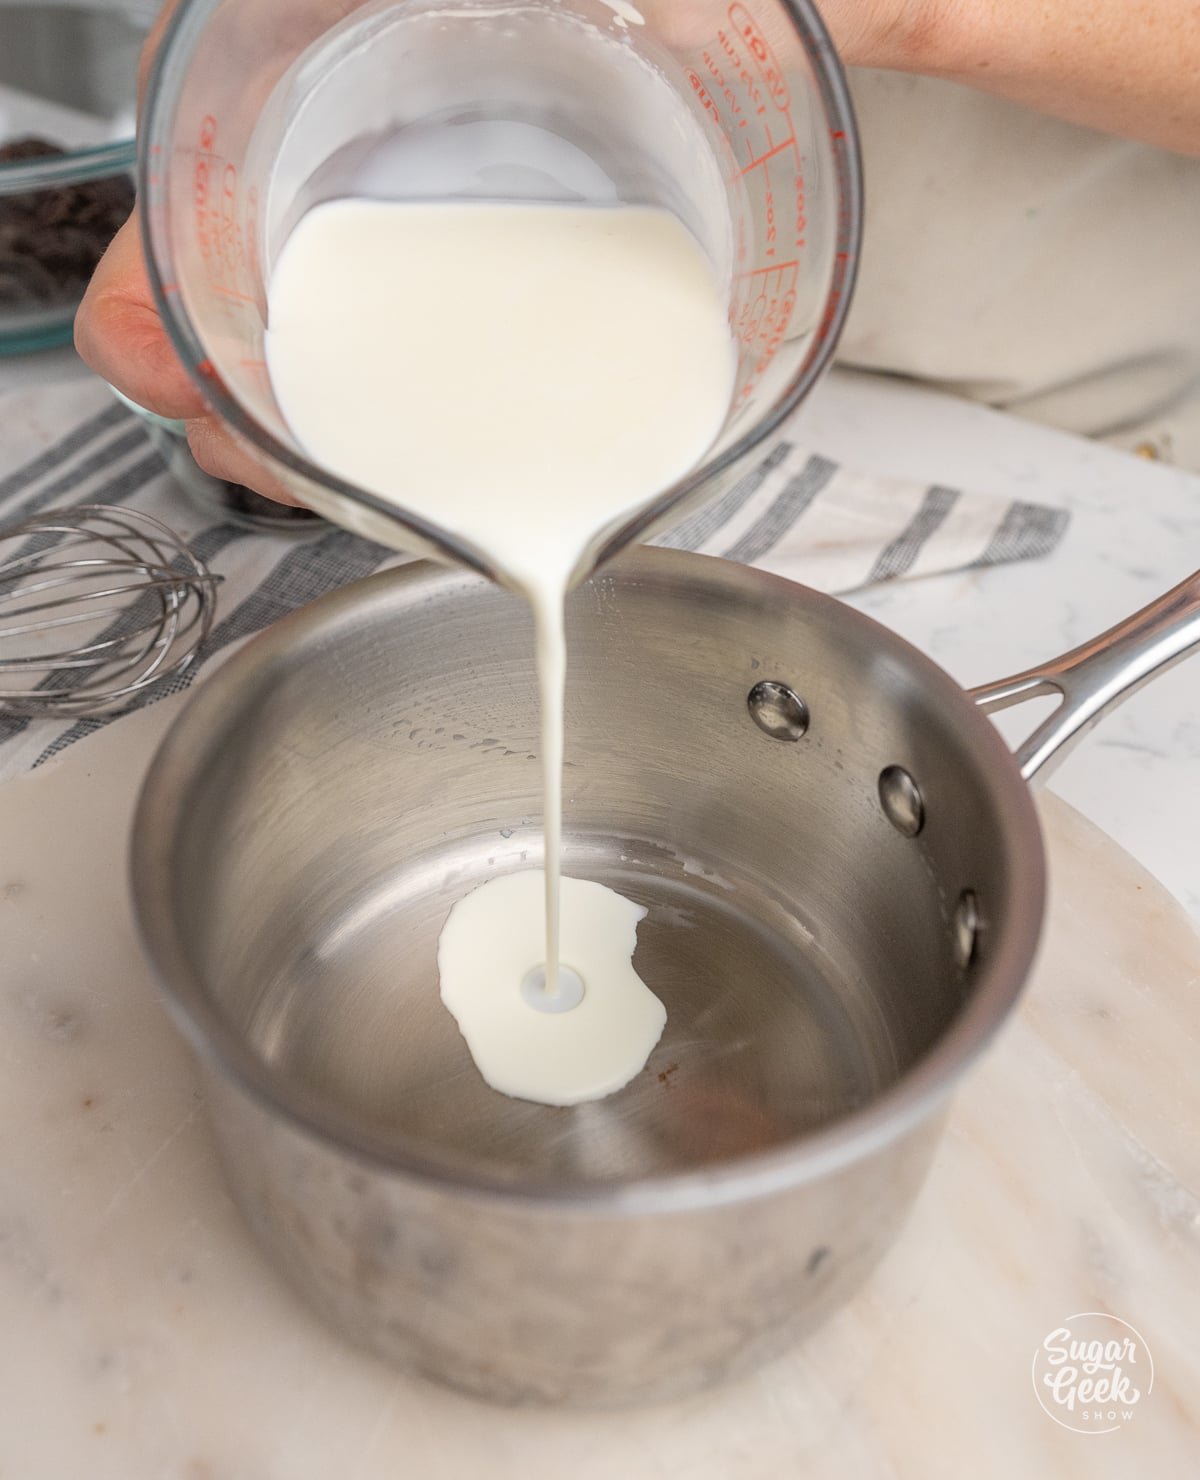 hands pouring a container of cream into a saucepan